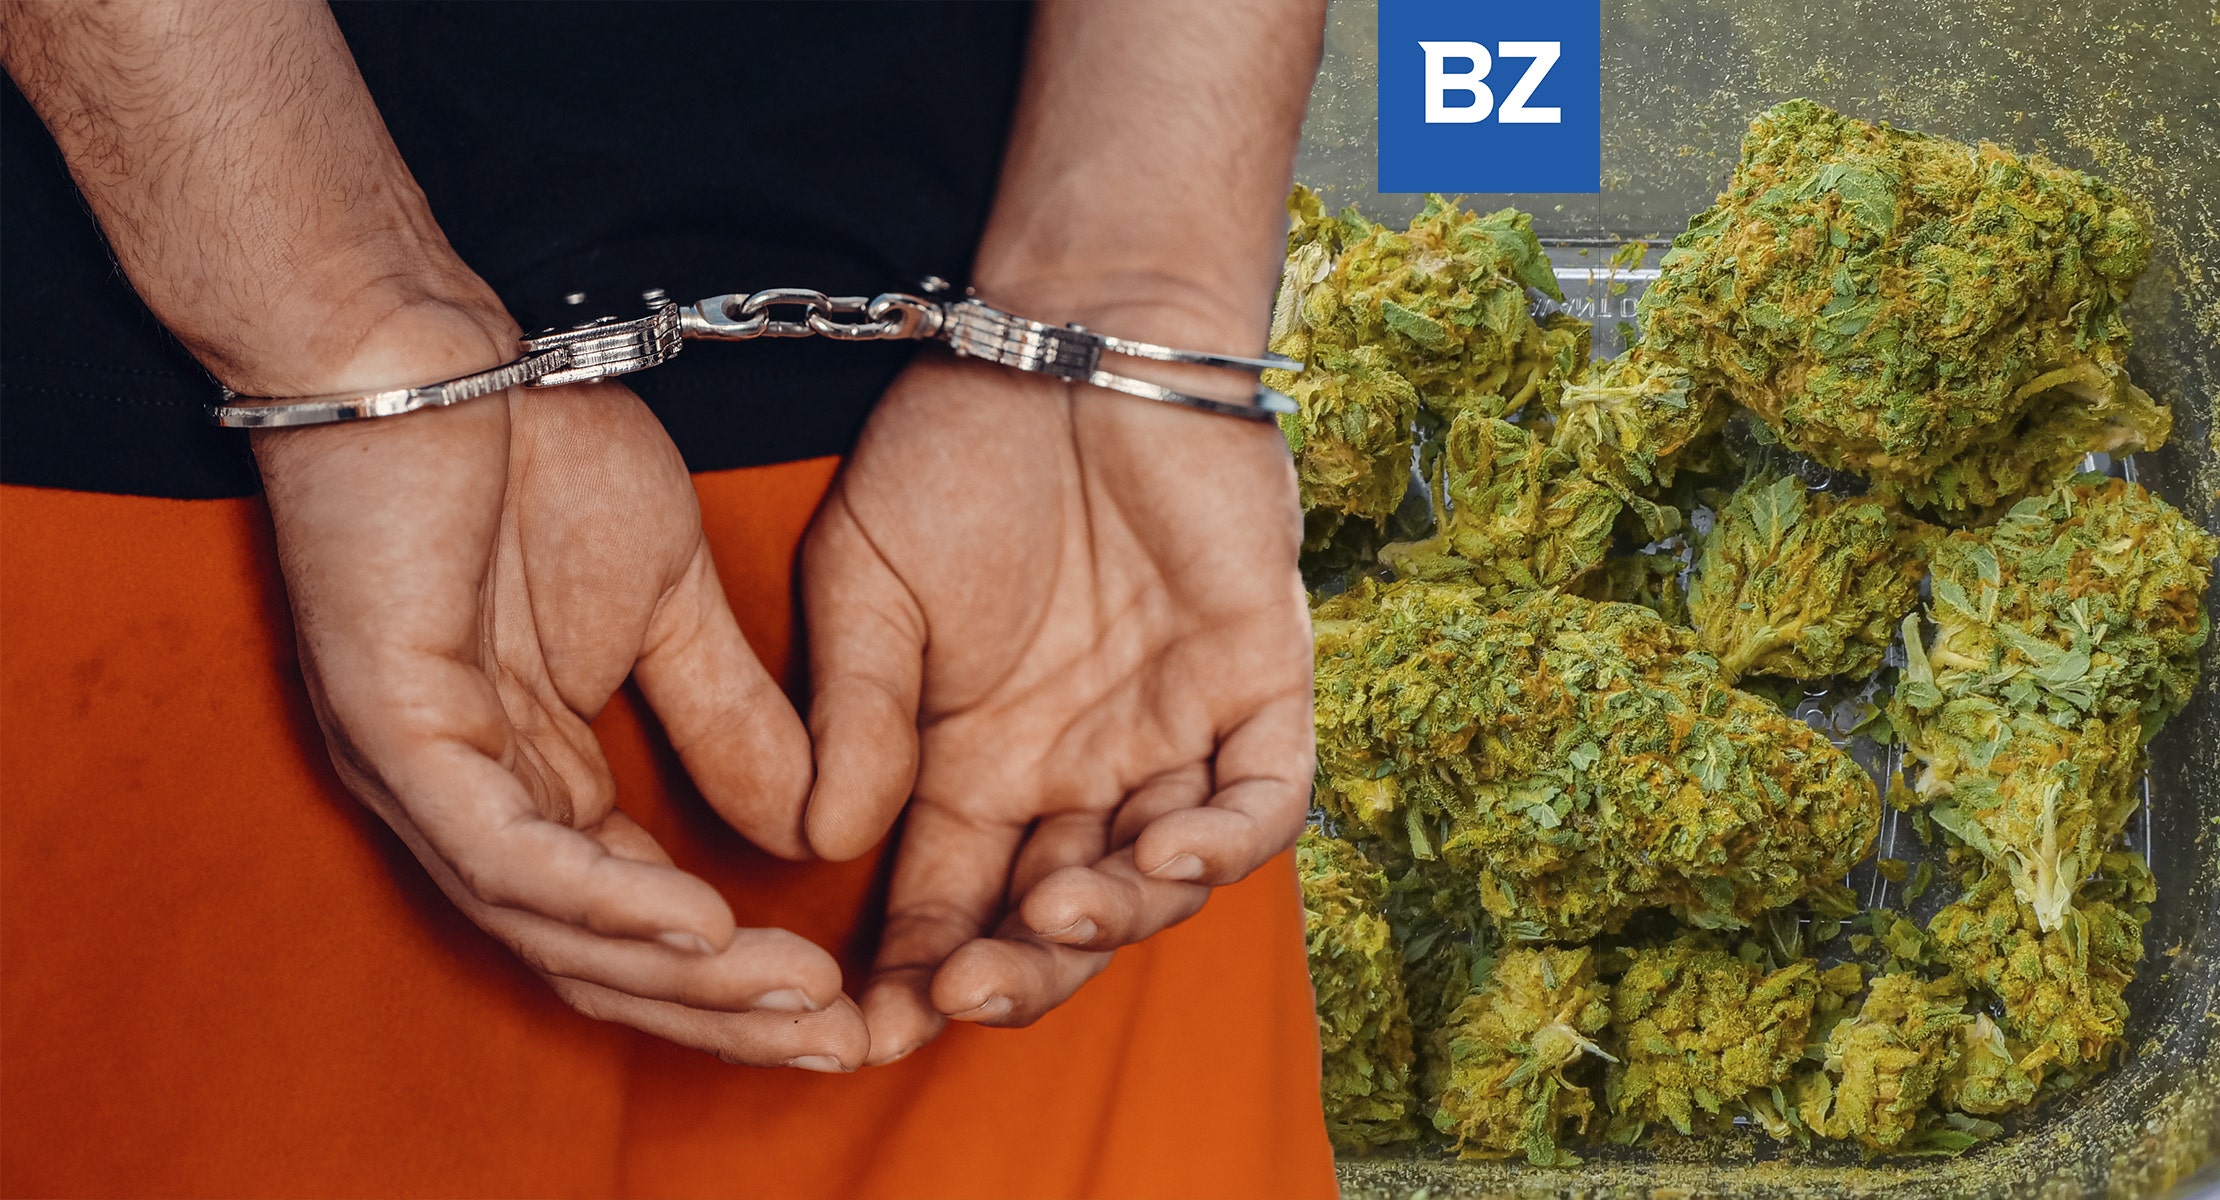 Cross-Country Cannabis Caper: How Smugglers Made Millions Selling California Weed To New Yorkers